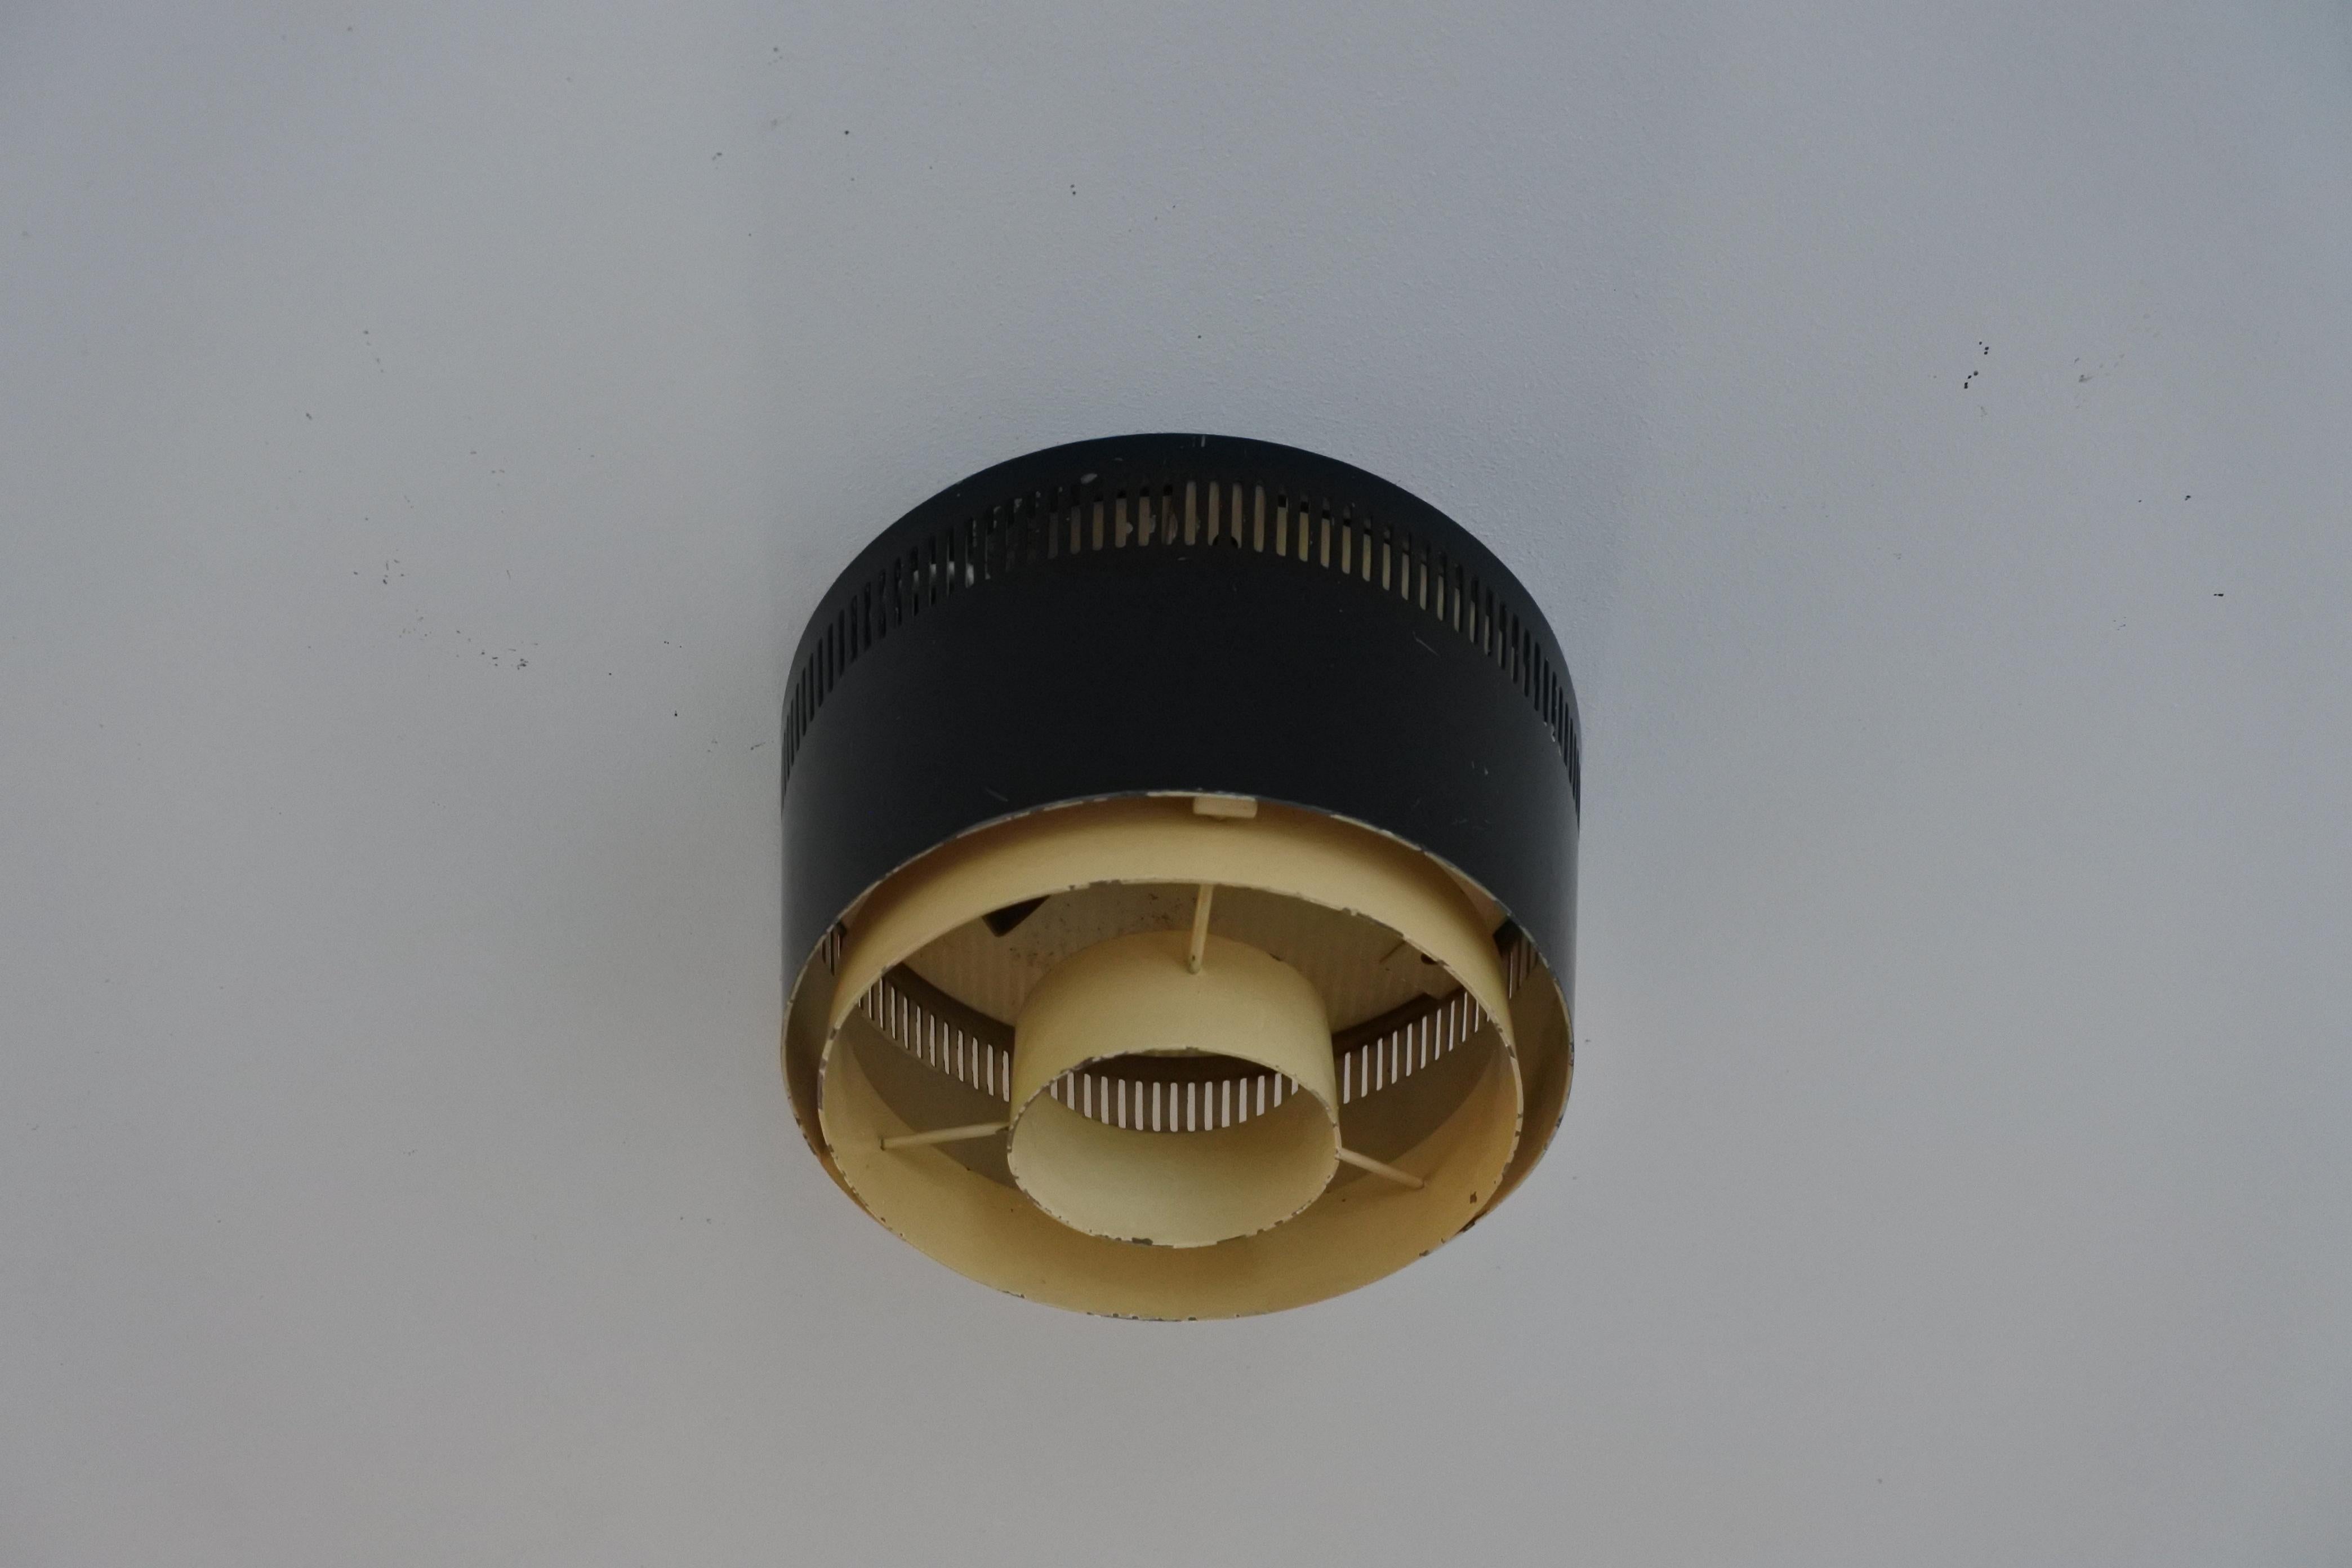 One flush mount ceiling light. 
Designed and manufactured in Finland in the 1950s. 
Black and white lacquered metal. 
Each light takes one E27 bulb.
Each marked Itsu

Outstanding ceiling lamp. 2 available.

Original electrical system. To be safe,